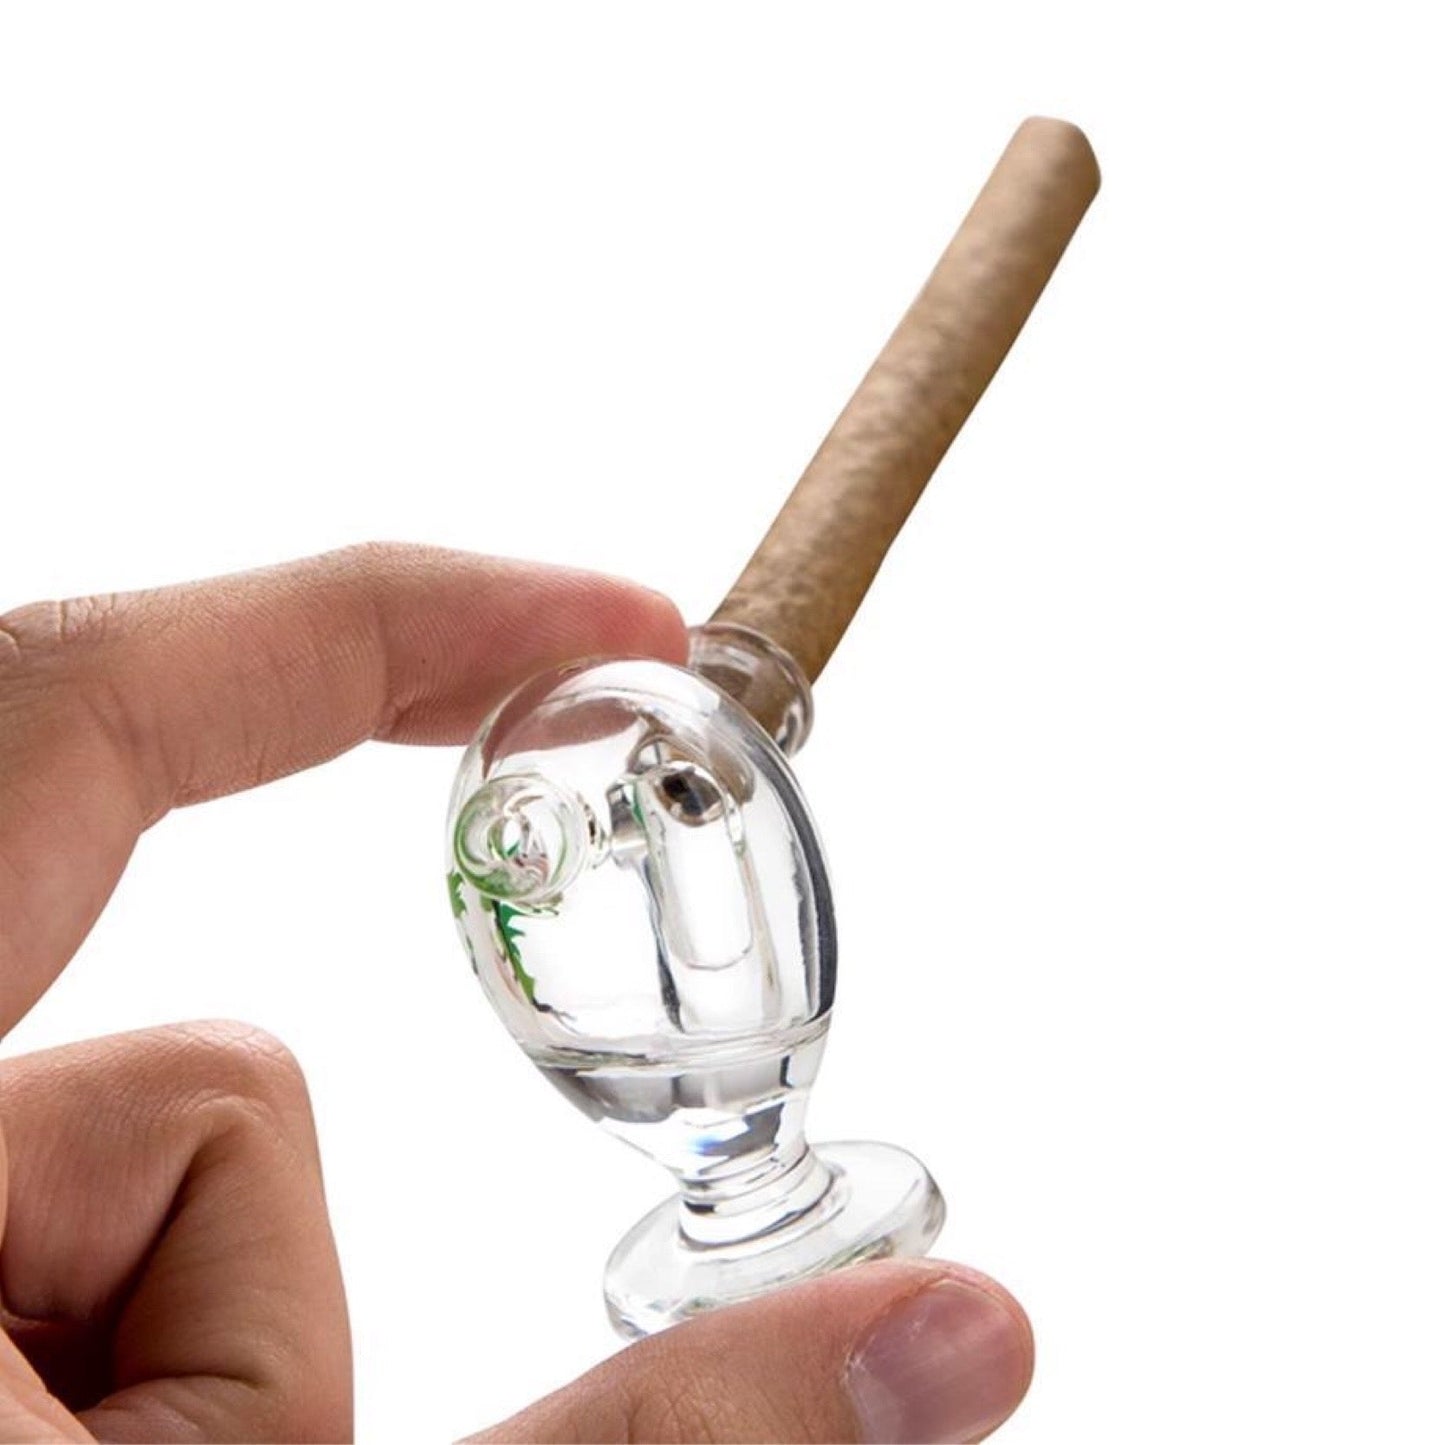 MJ Arsenal “Martian” Mini Joint & Blunt Bubbler - CaliConnected